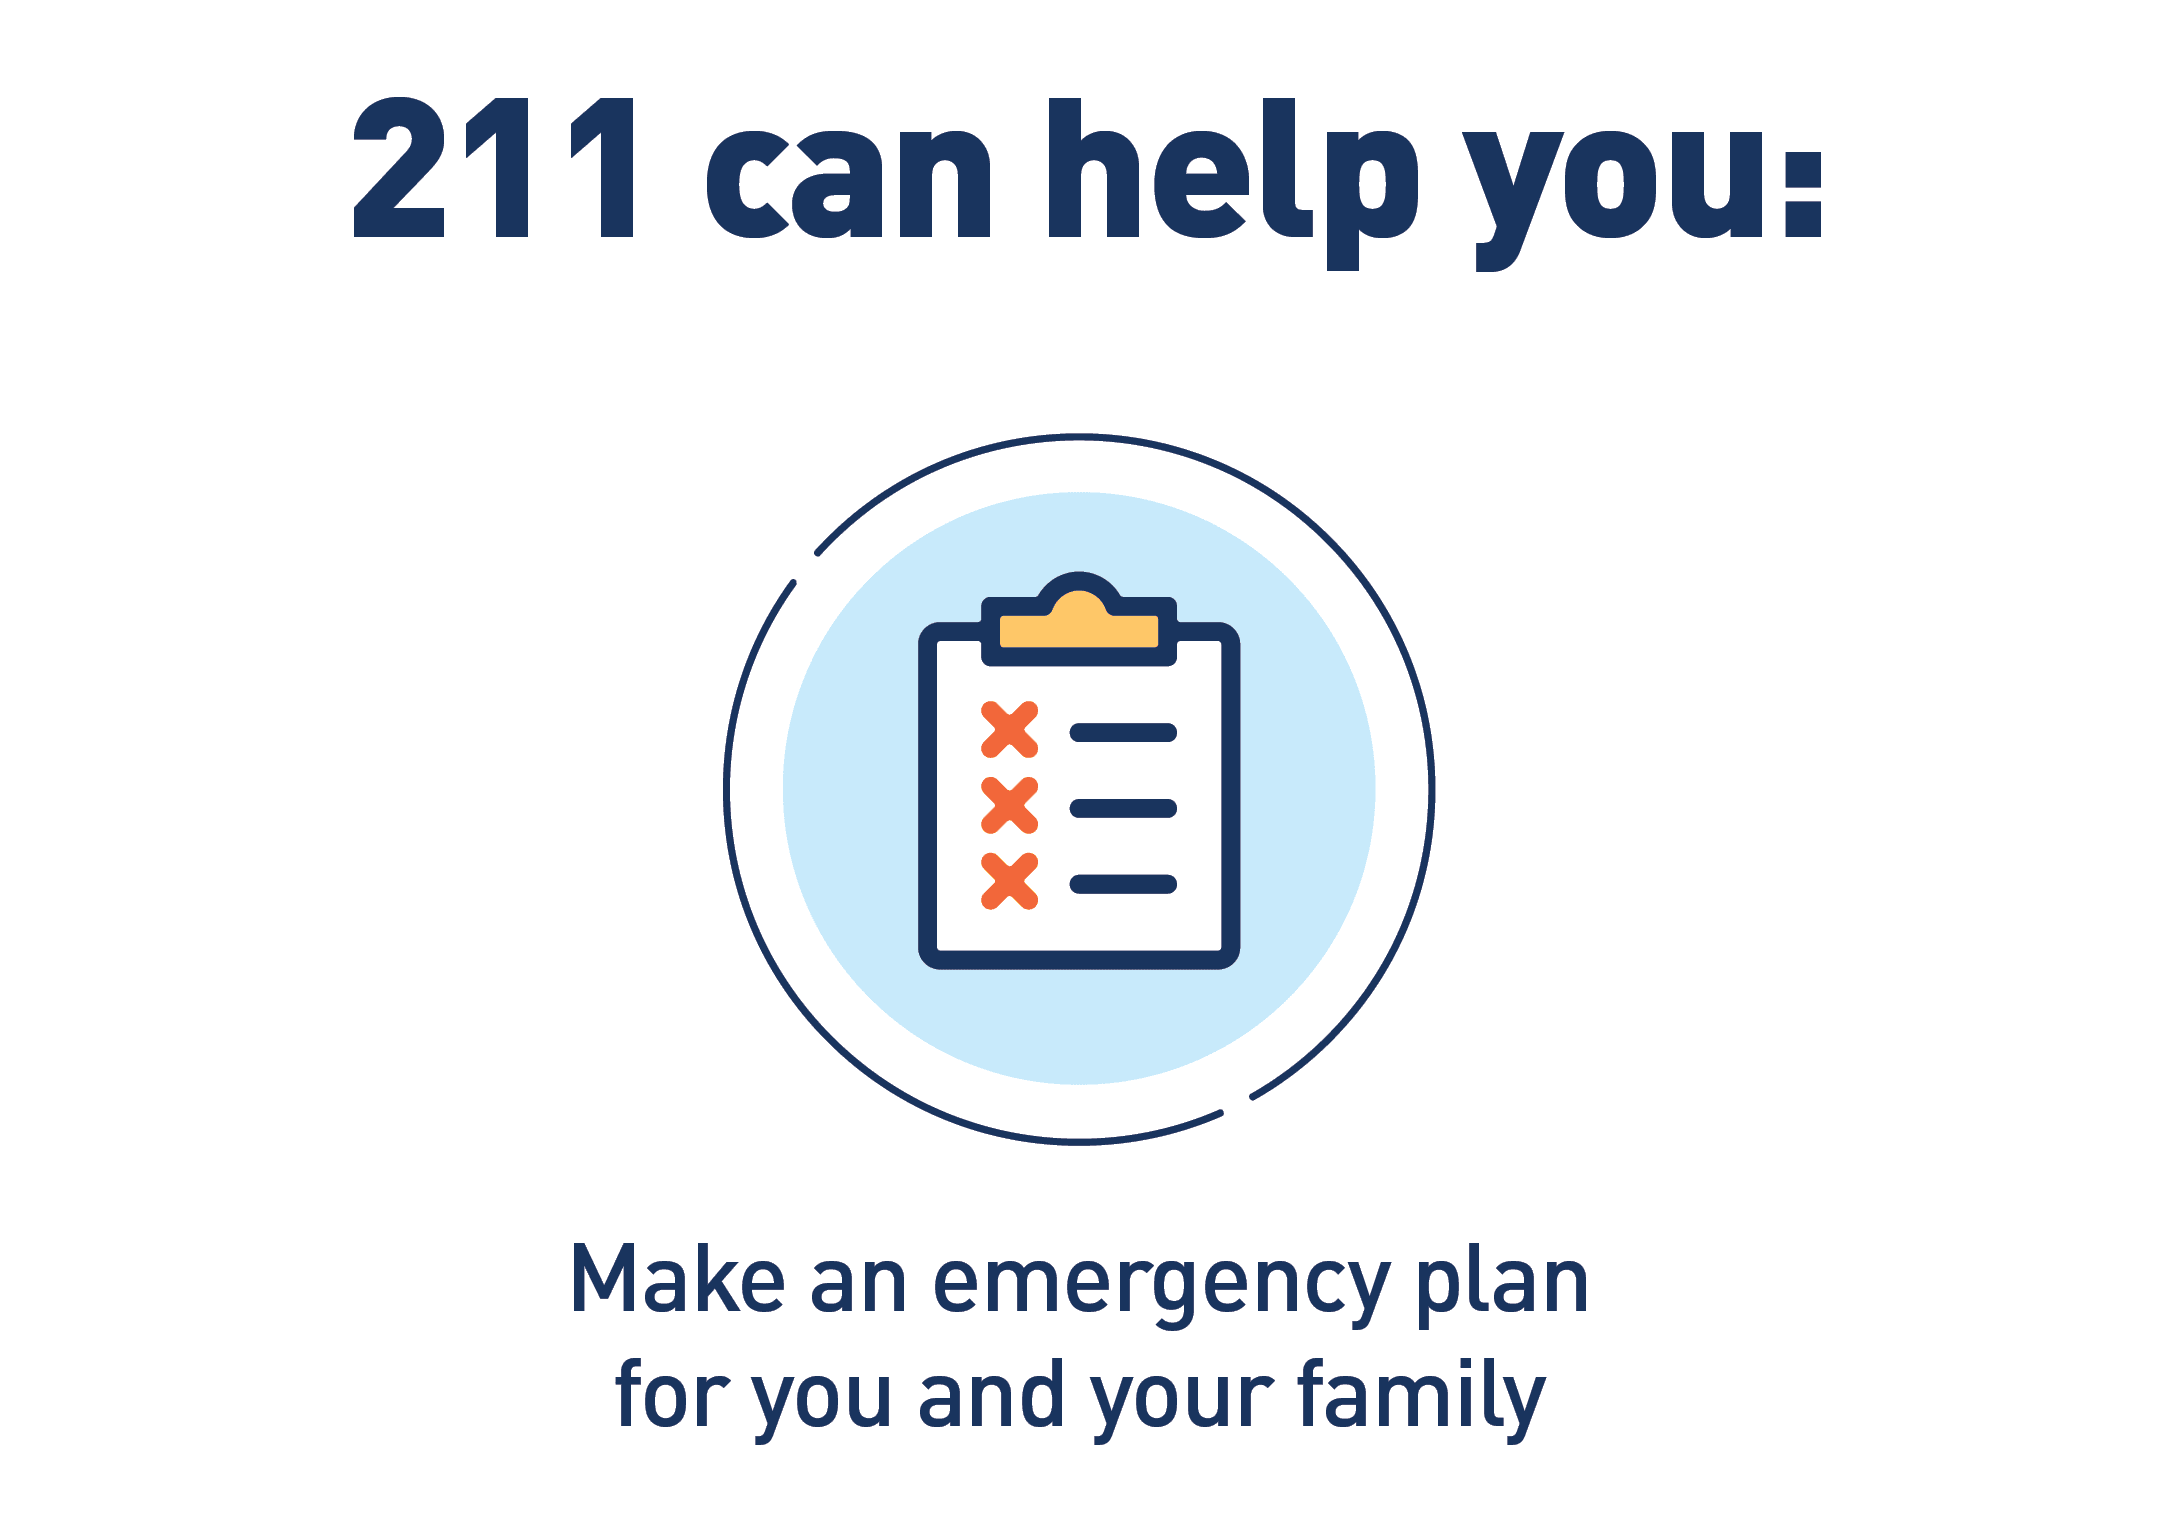 Graphic of emergency plan checklist. Text: 211 can help you: Make an emergency plan for you and your family